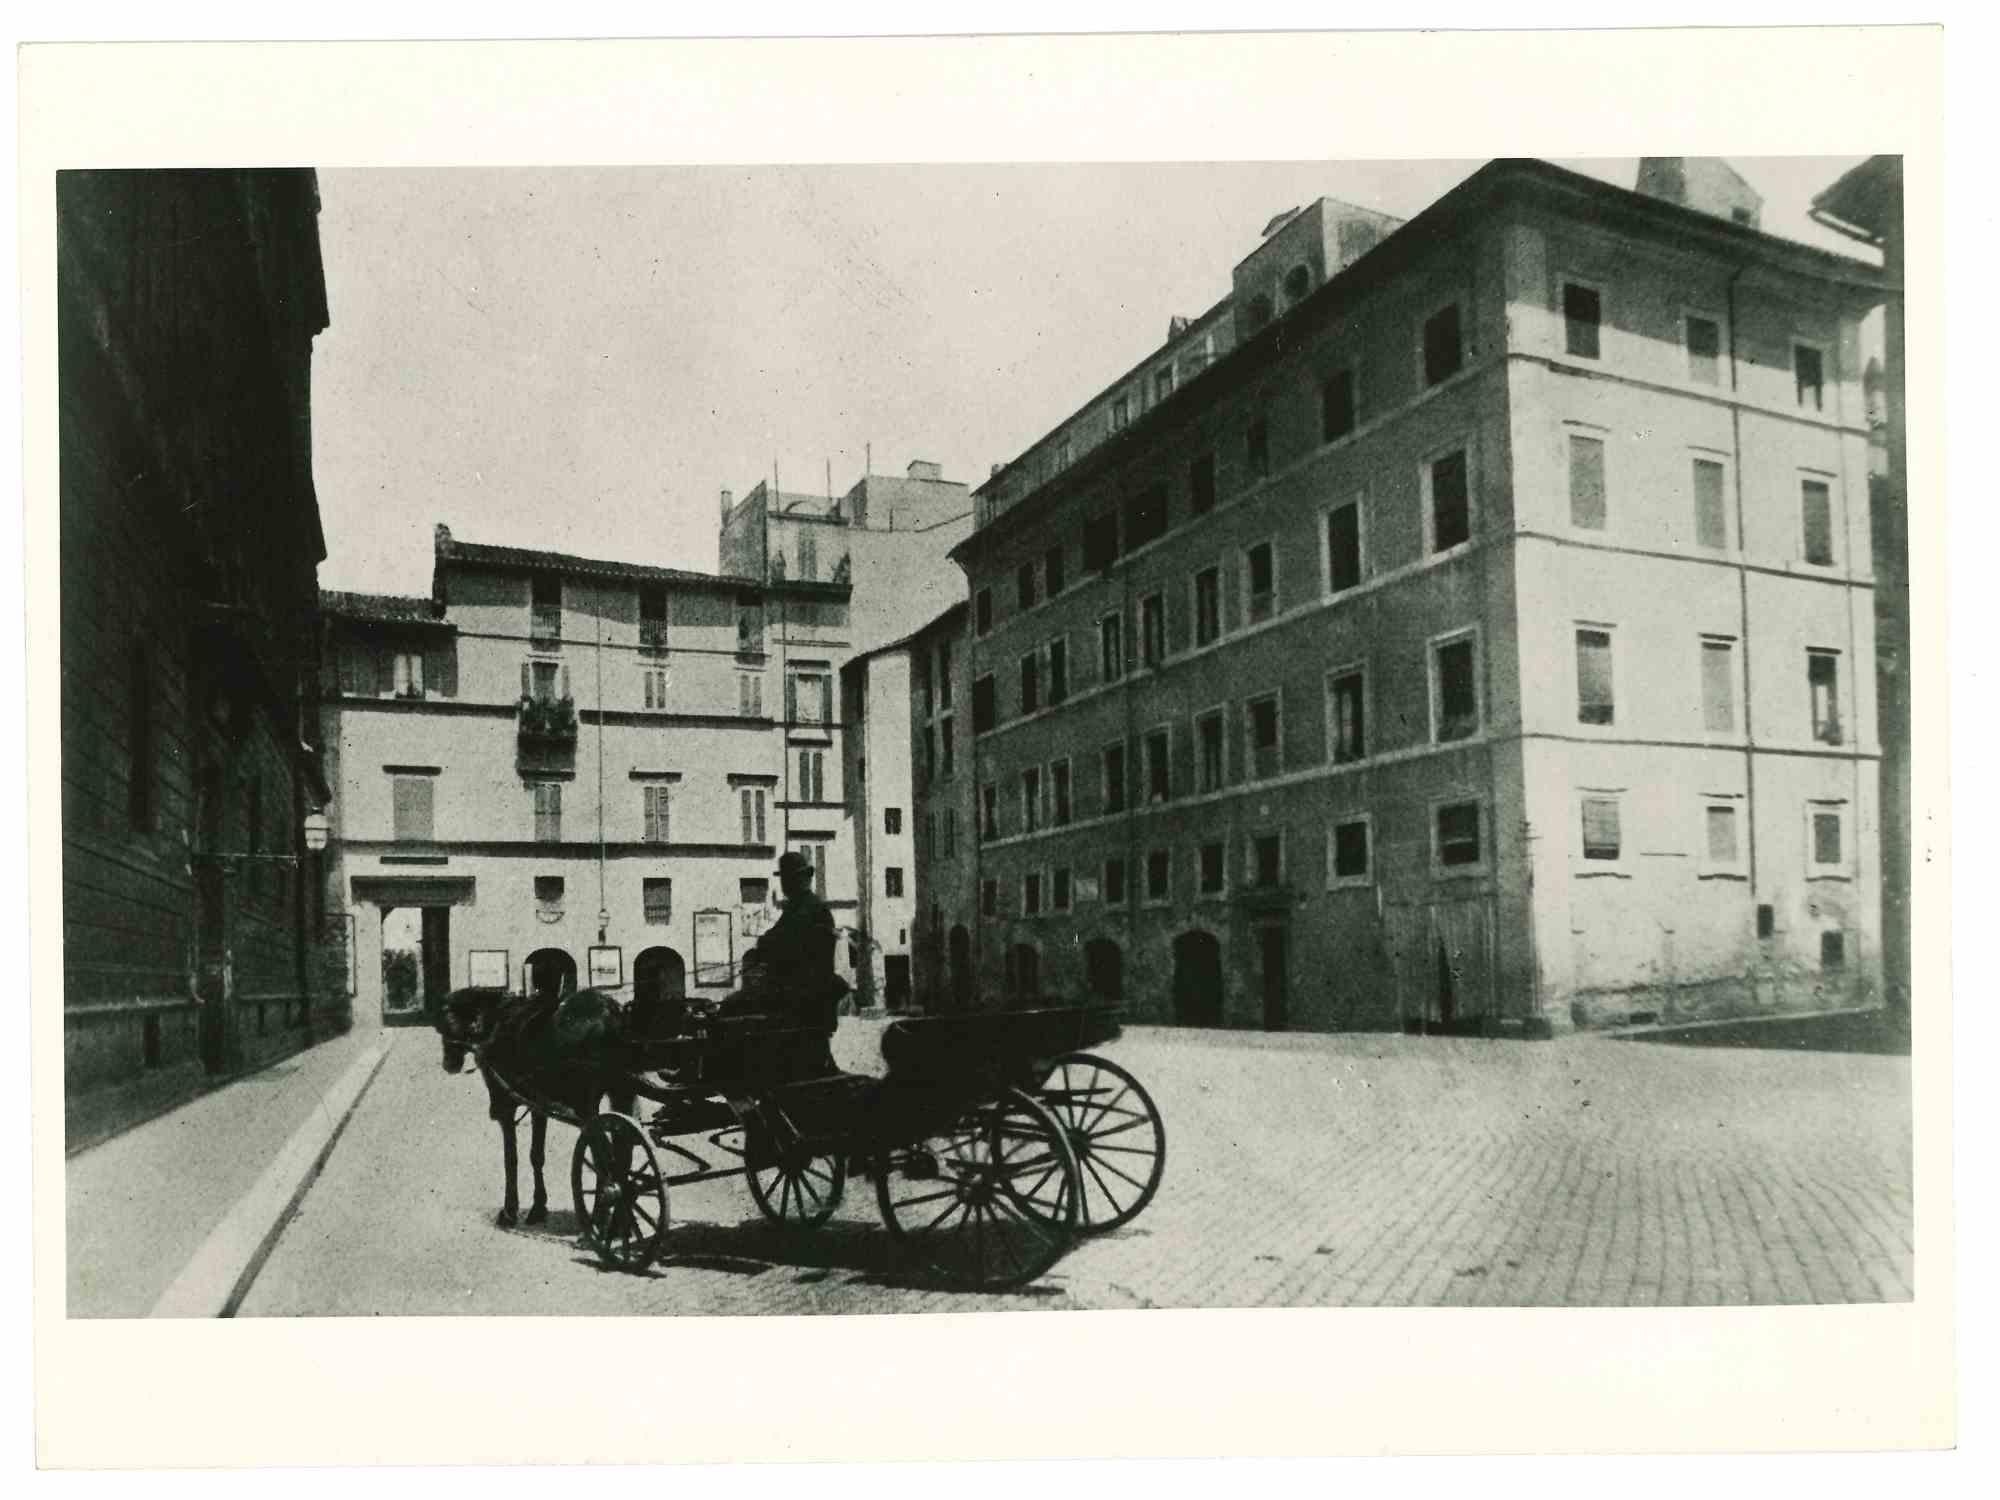 Unknown Landscape Photograph - View of Rome - Vintage Photograph - Early 20th Century